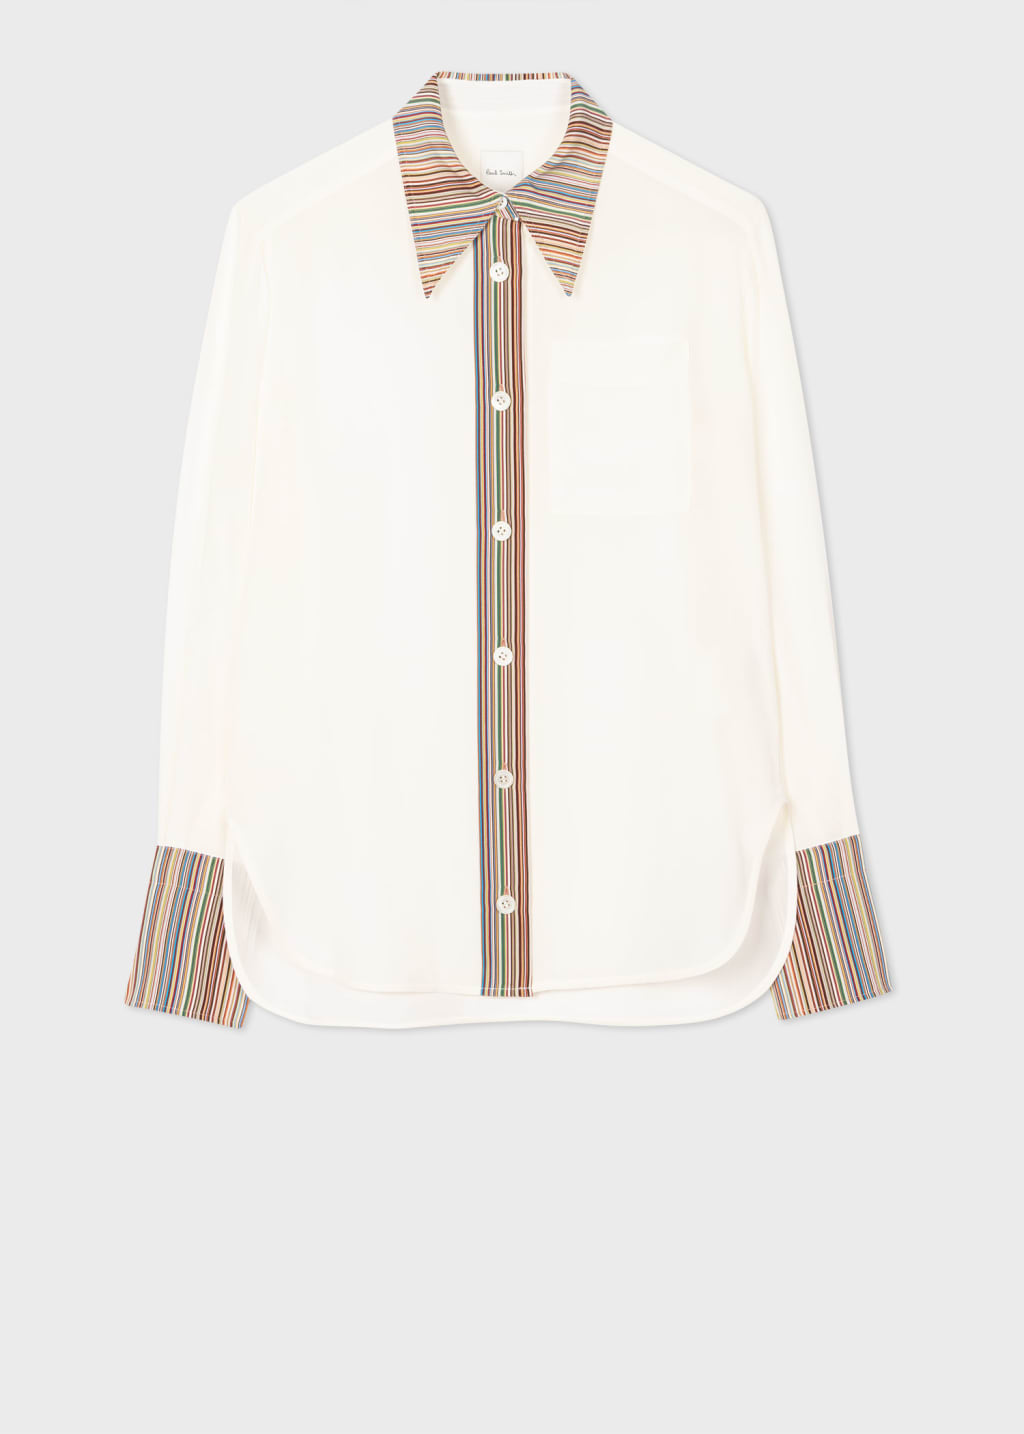 Product View - Women's Ivory Silk 'Signature Stripe' Long-Sleeve Shirt by Paul Smith